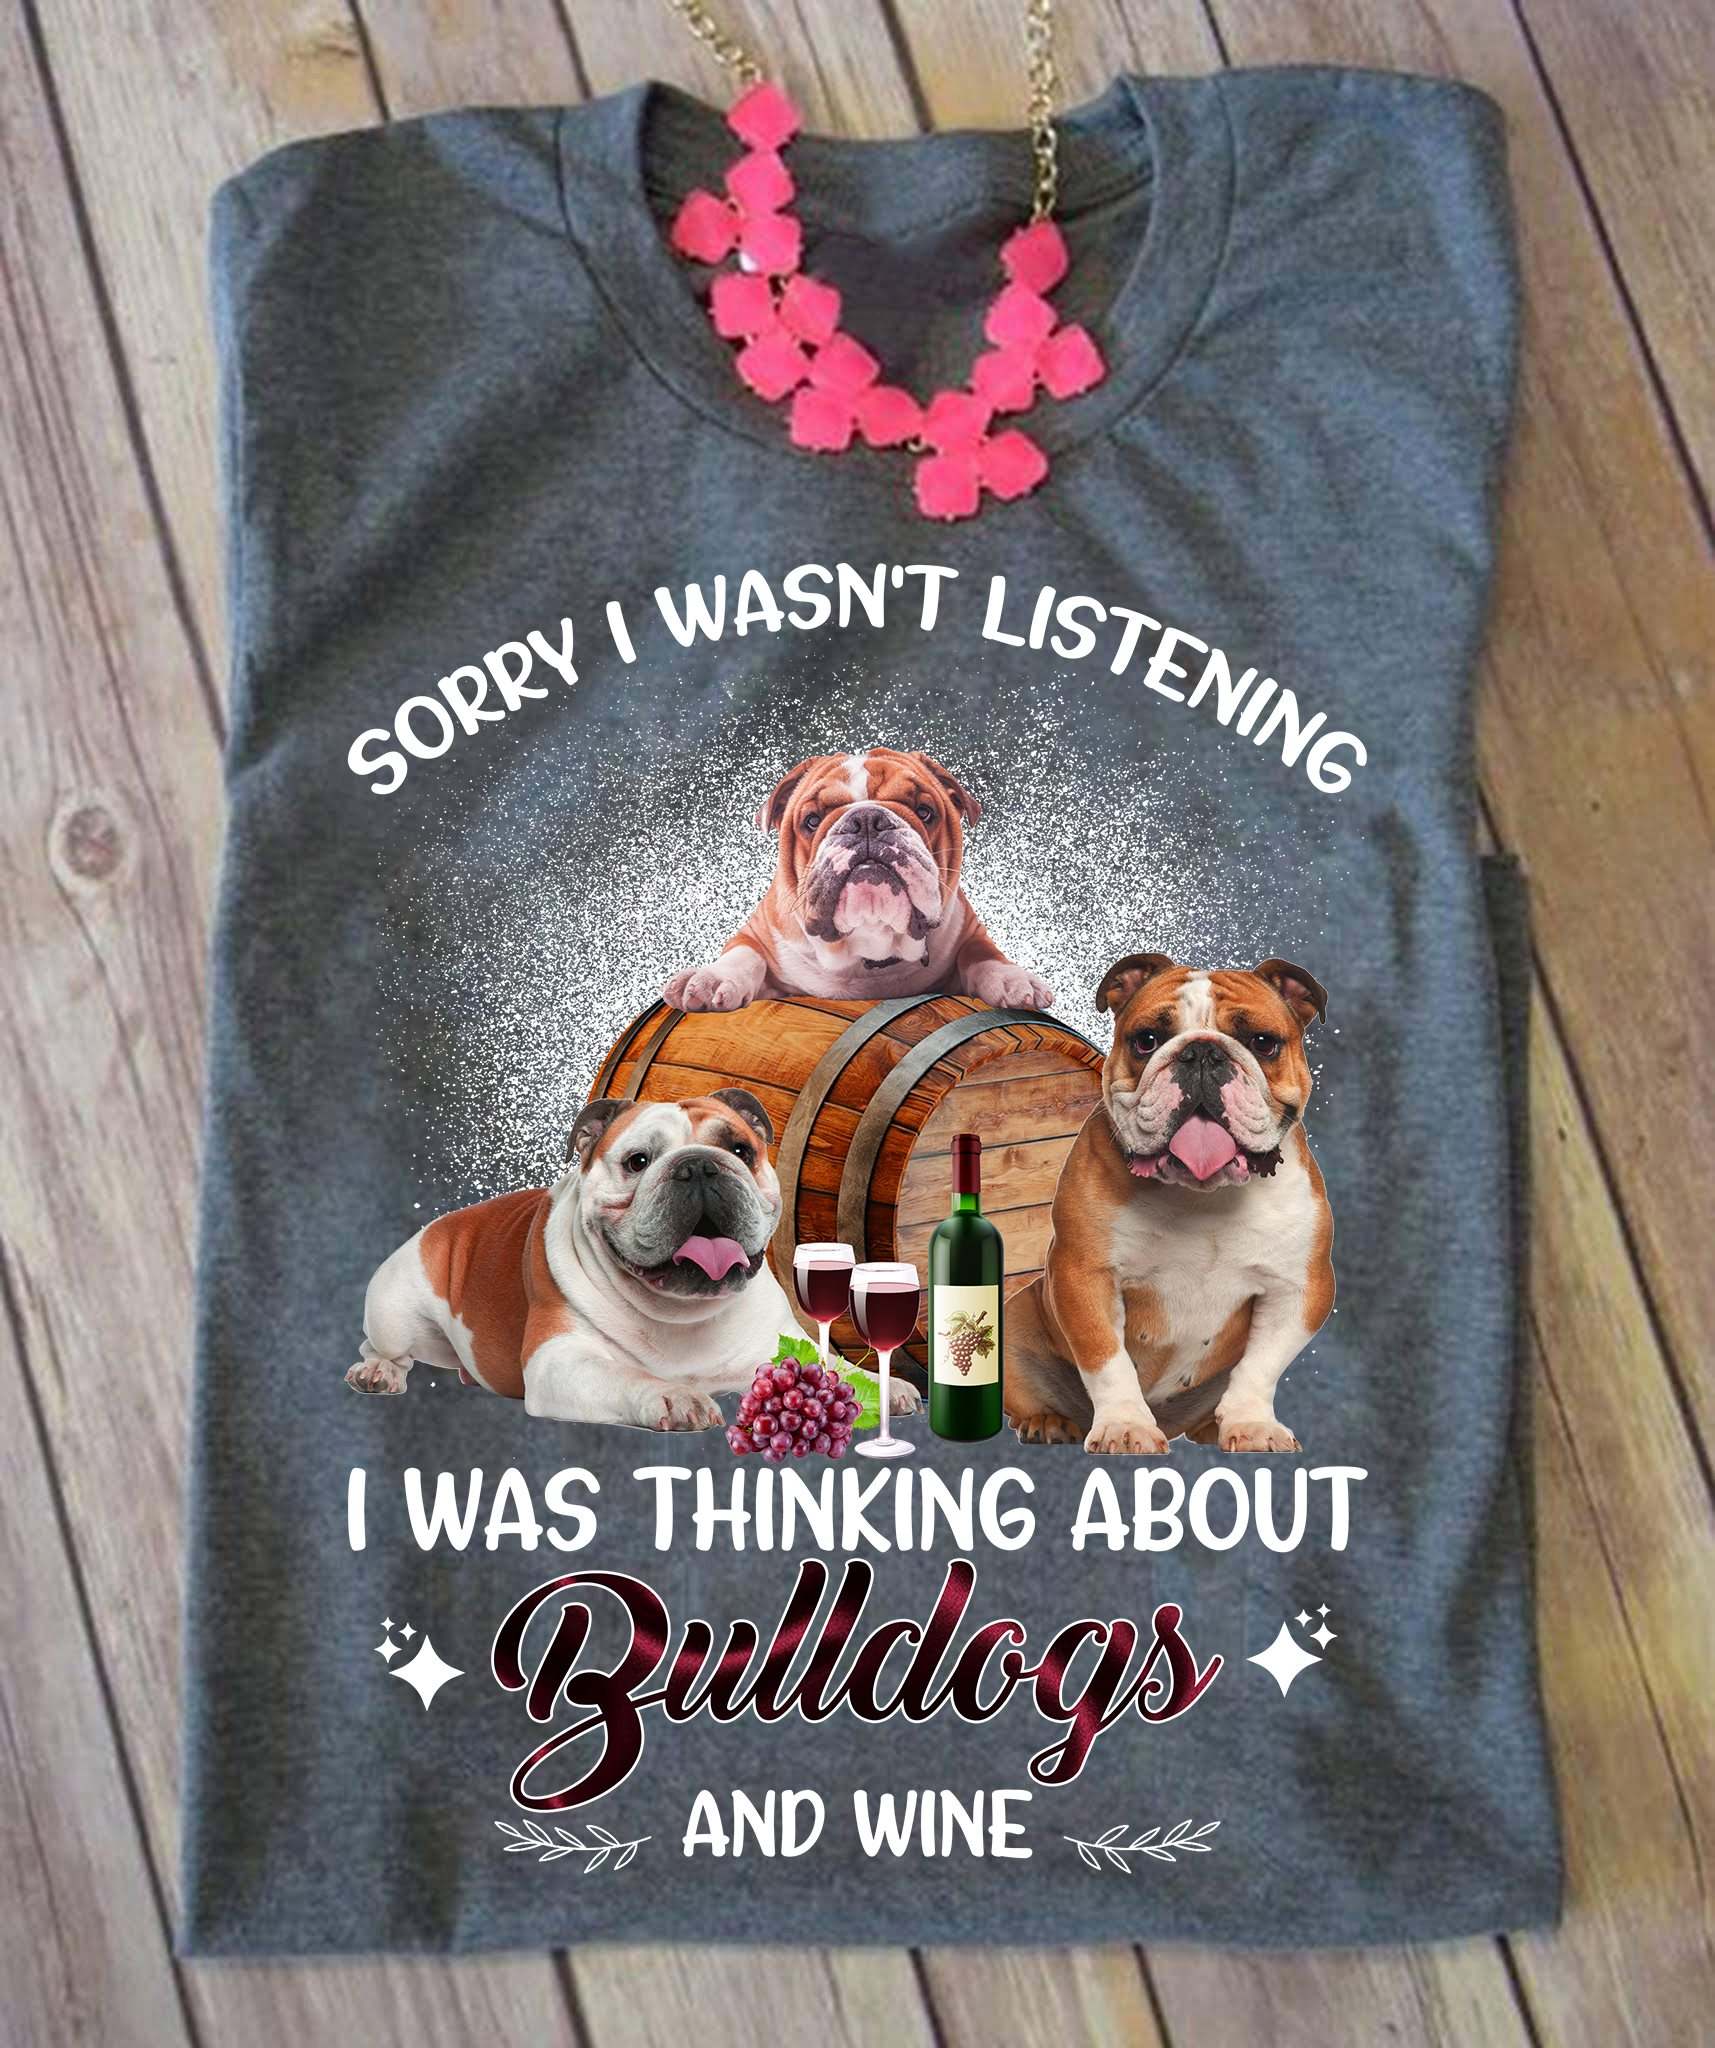 Sorry I wasn't listening I was thinking about bulldogs and wine - Wine lover